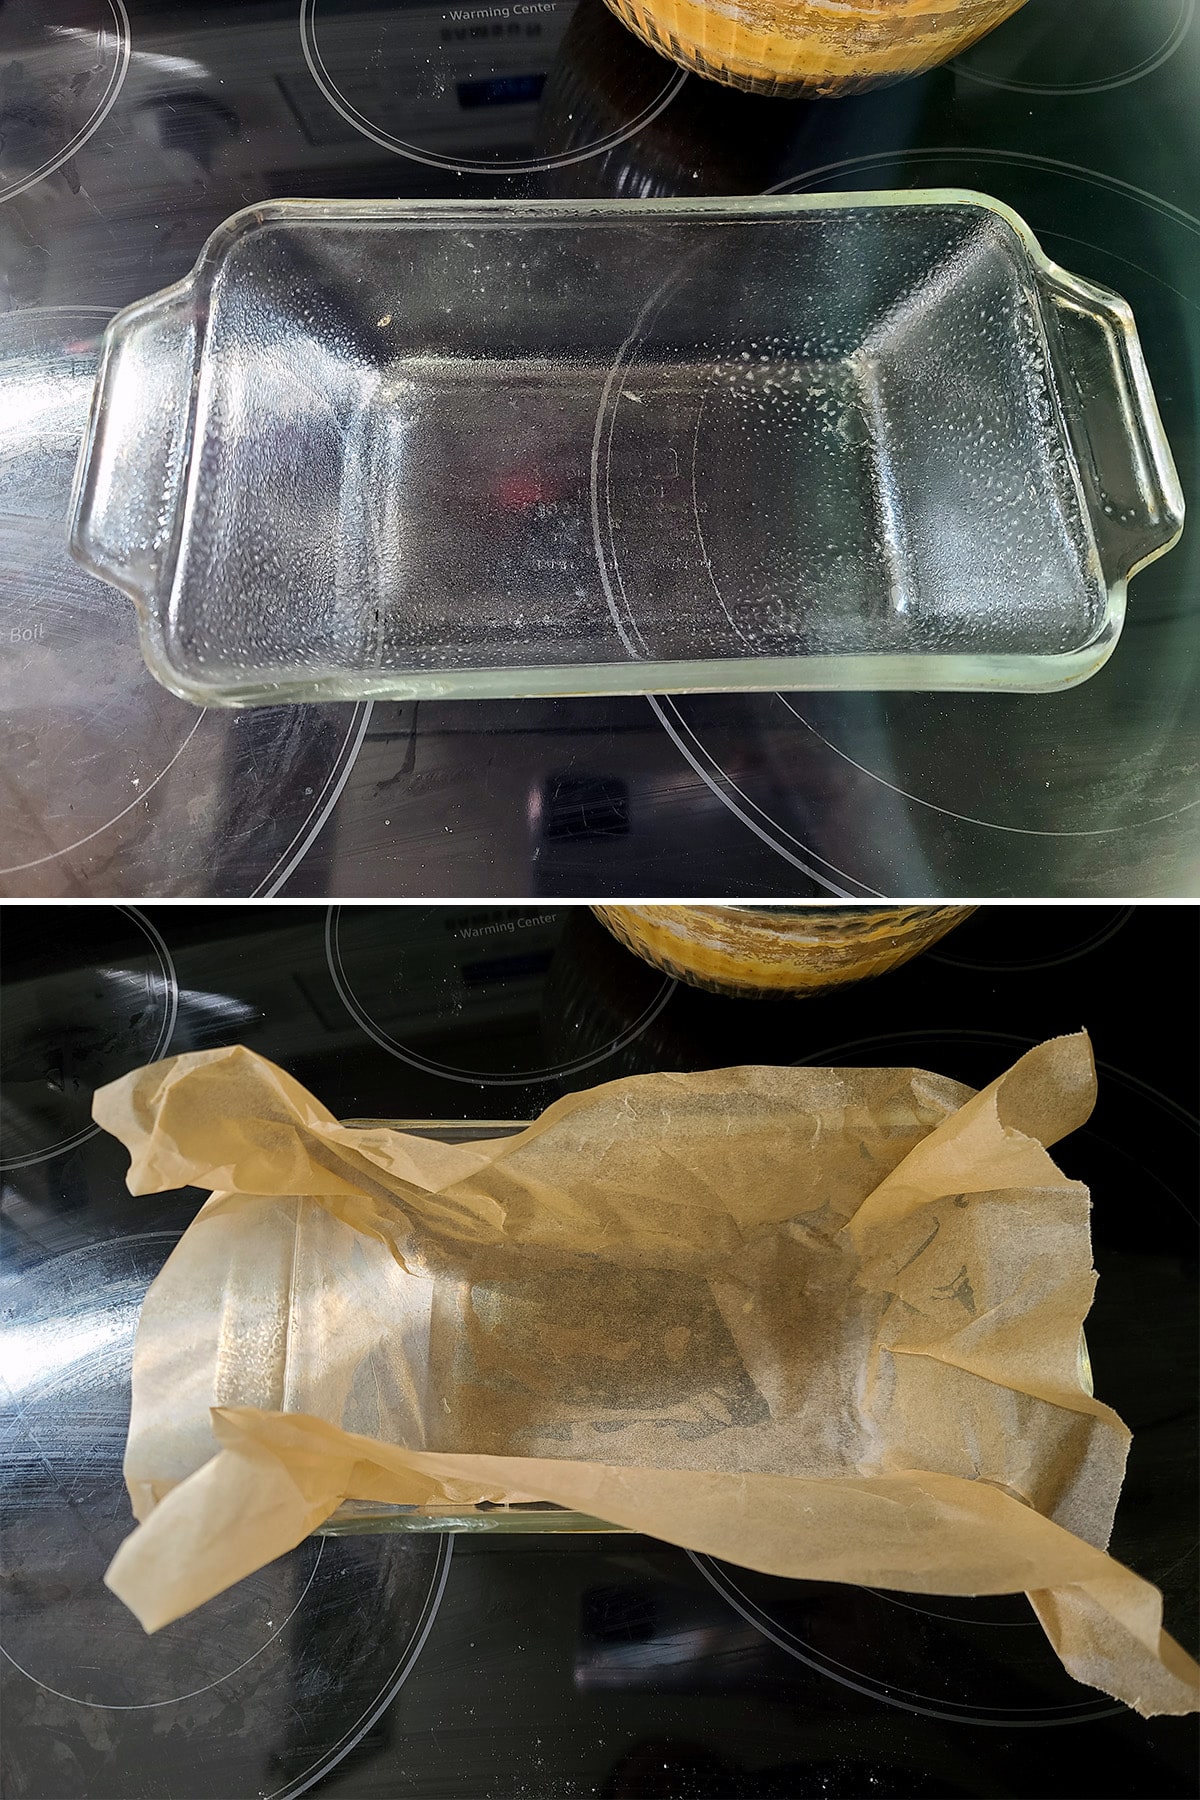 A 2 part image showing a greased loaf pan being lined with parchment paper.